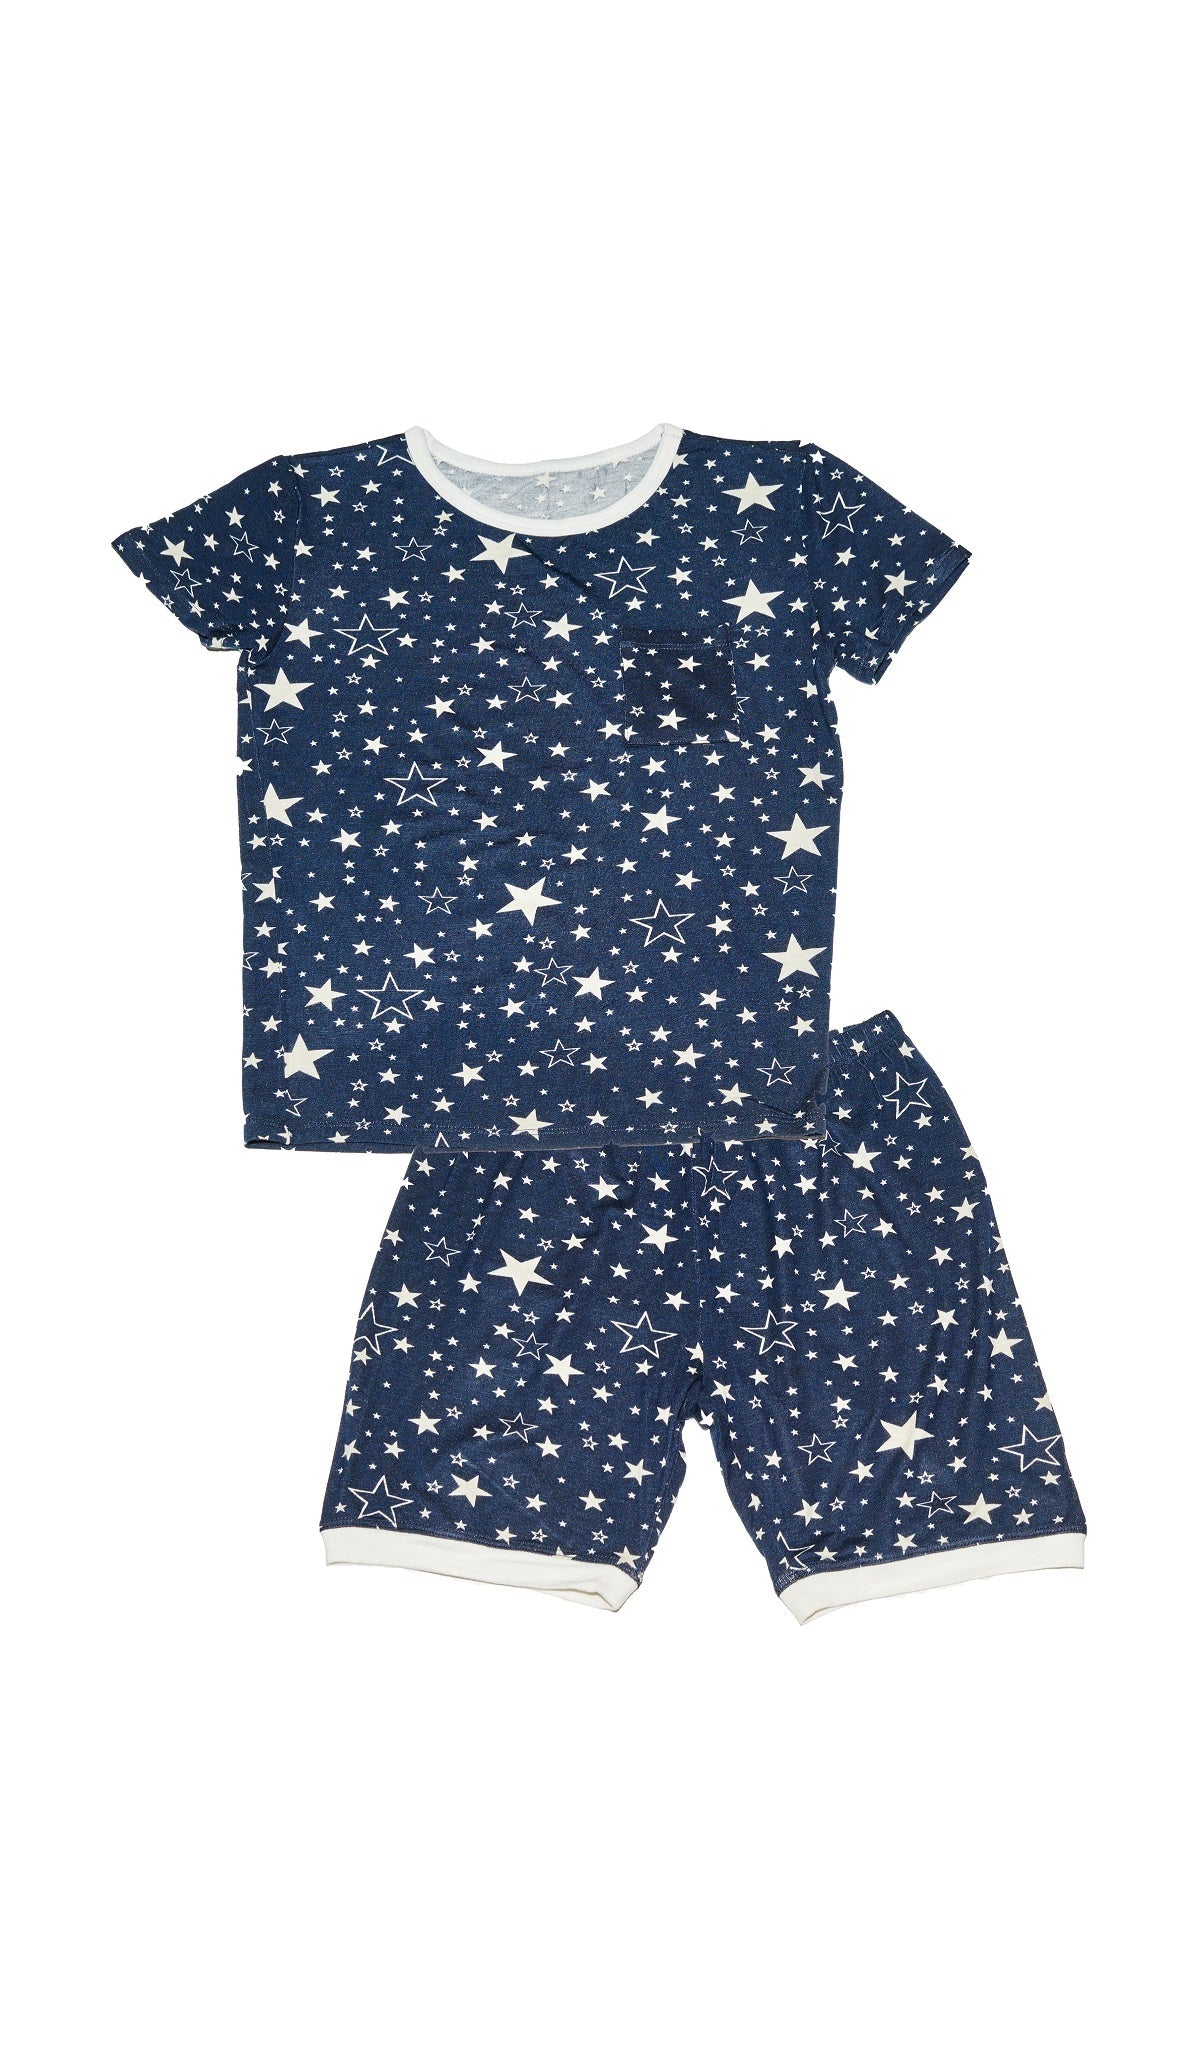 Stars Aydenne Baby 2-Piece Short PJ. Short sleeve top with front patch pocket.  Matching shorts with cuff trim and elastic waistband.